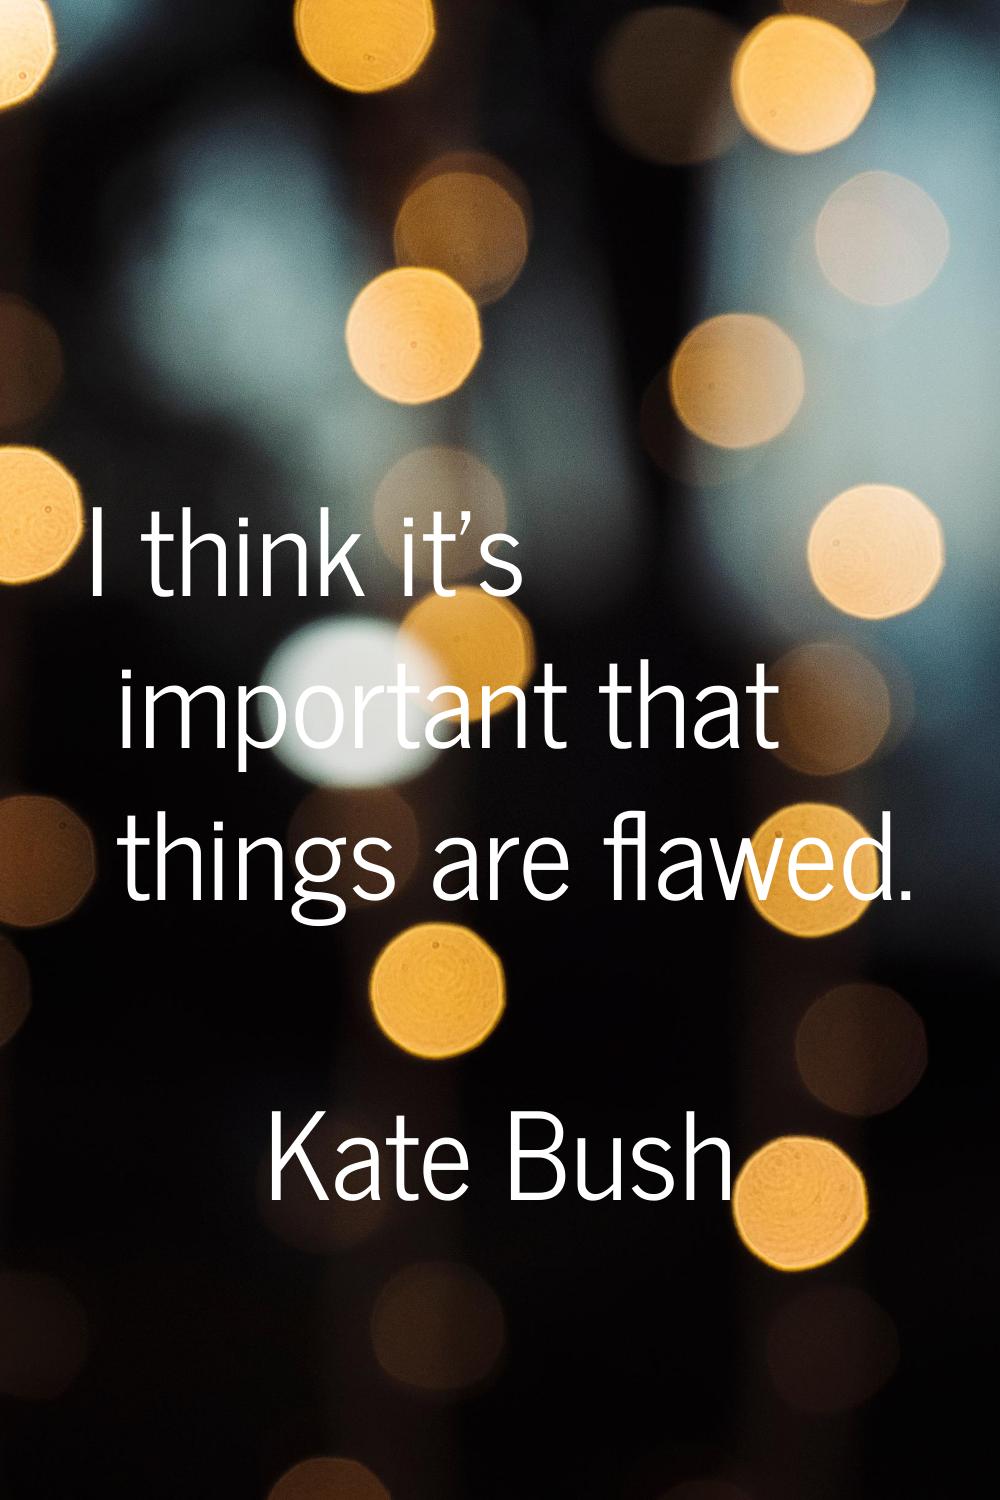 I think it's important that things are flawed.